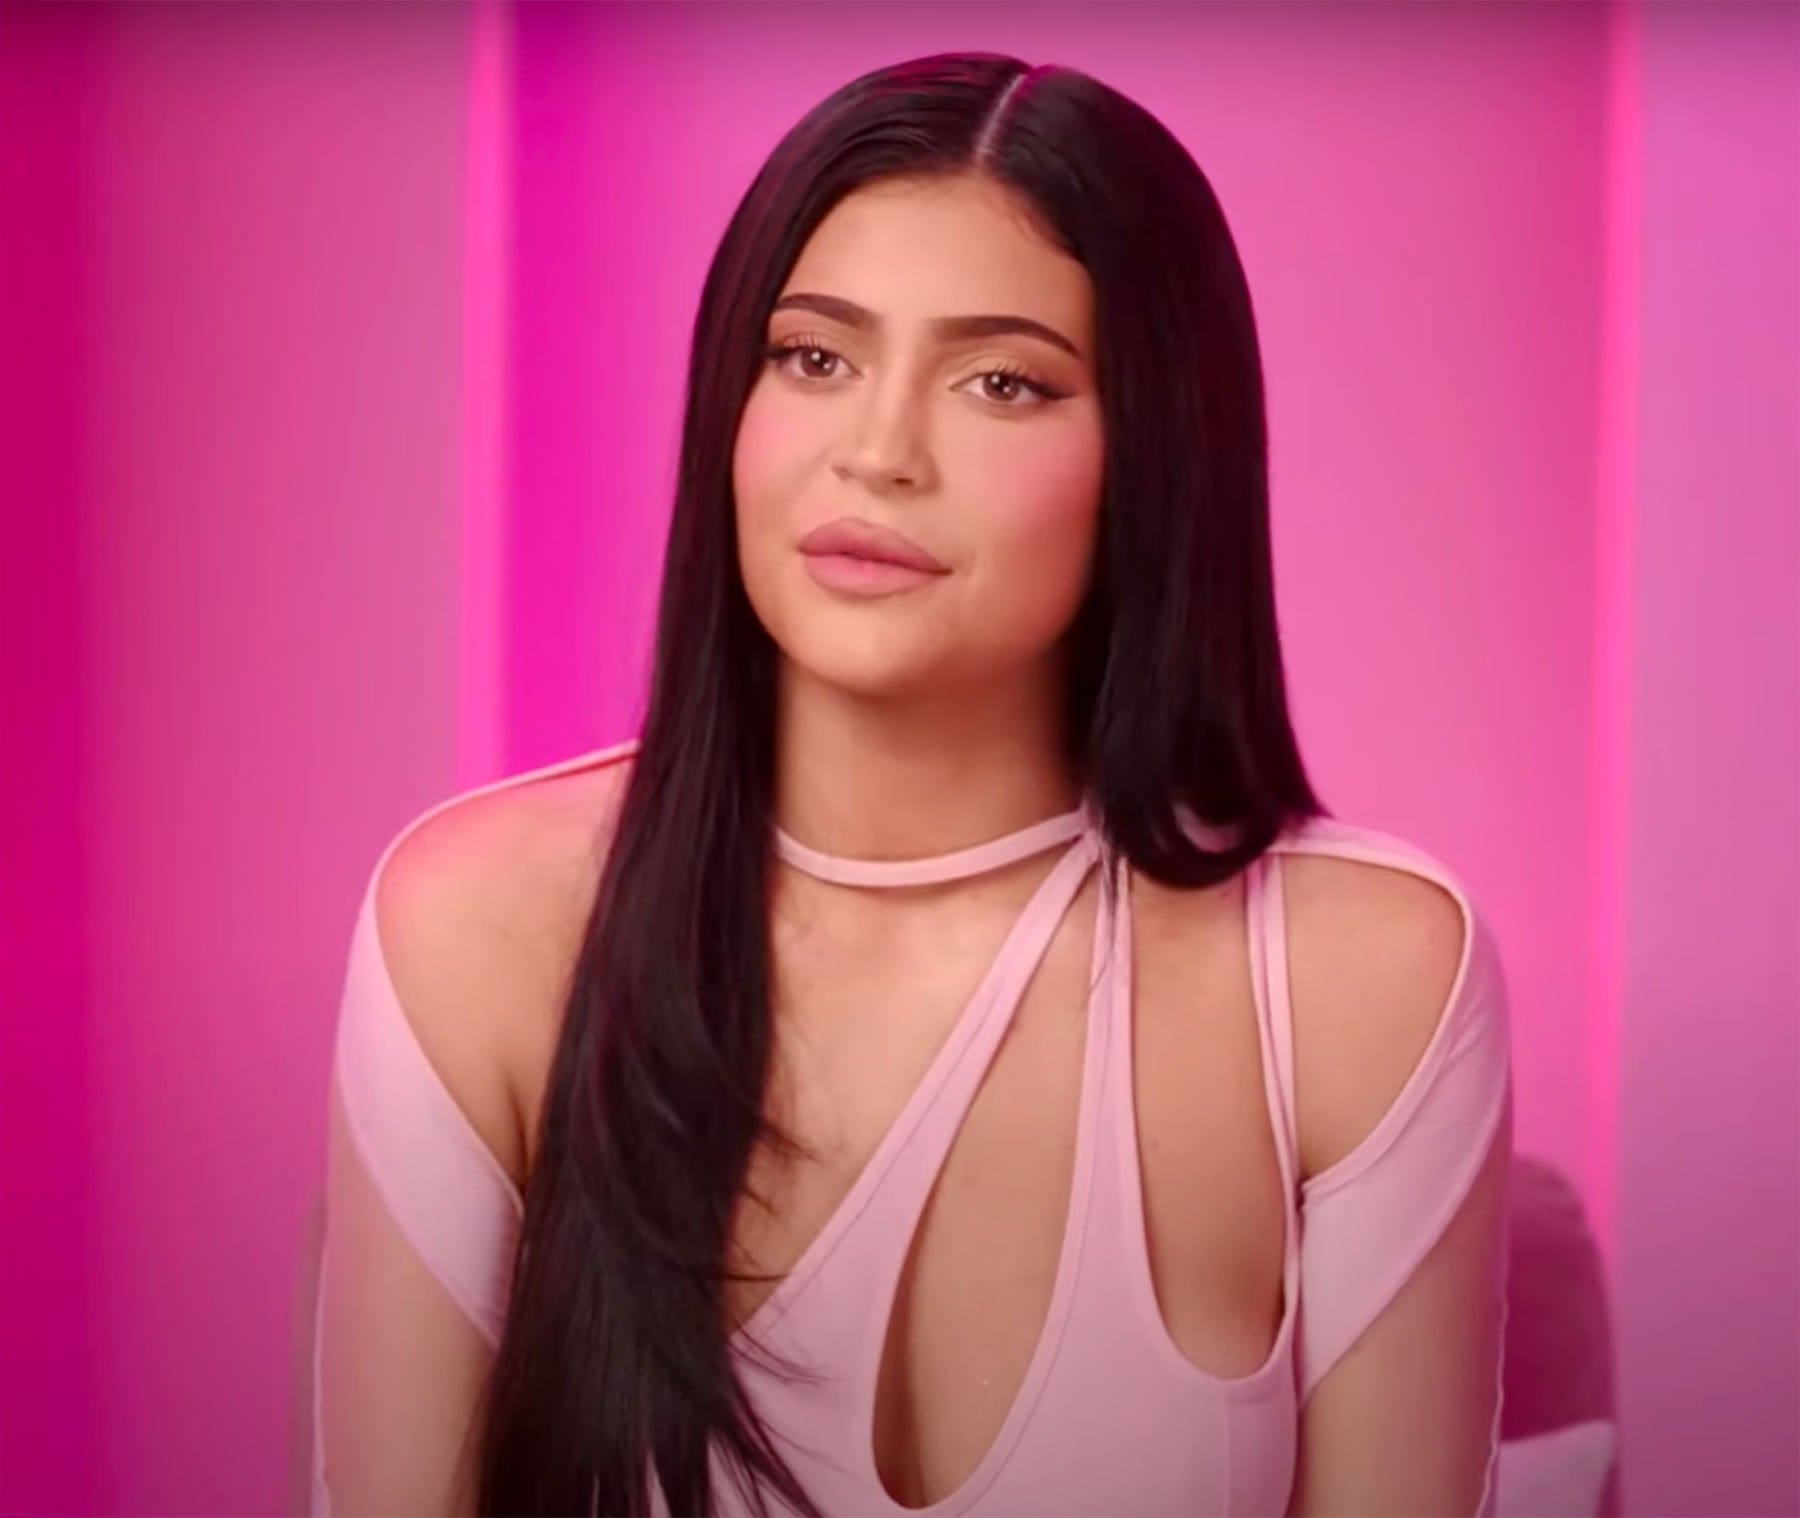 kuwtk-kylie-jenner-shows-off-her-natural-beauty-in-no-makeup-pics